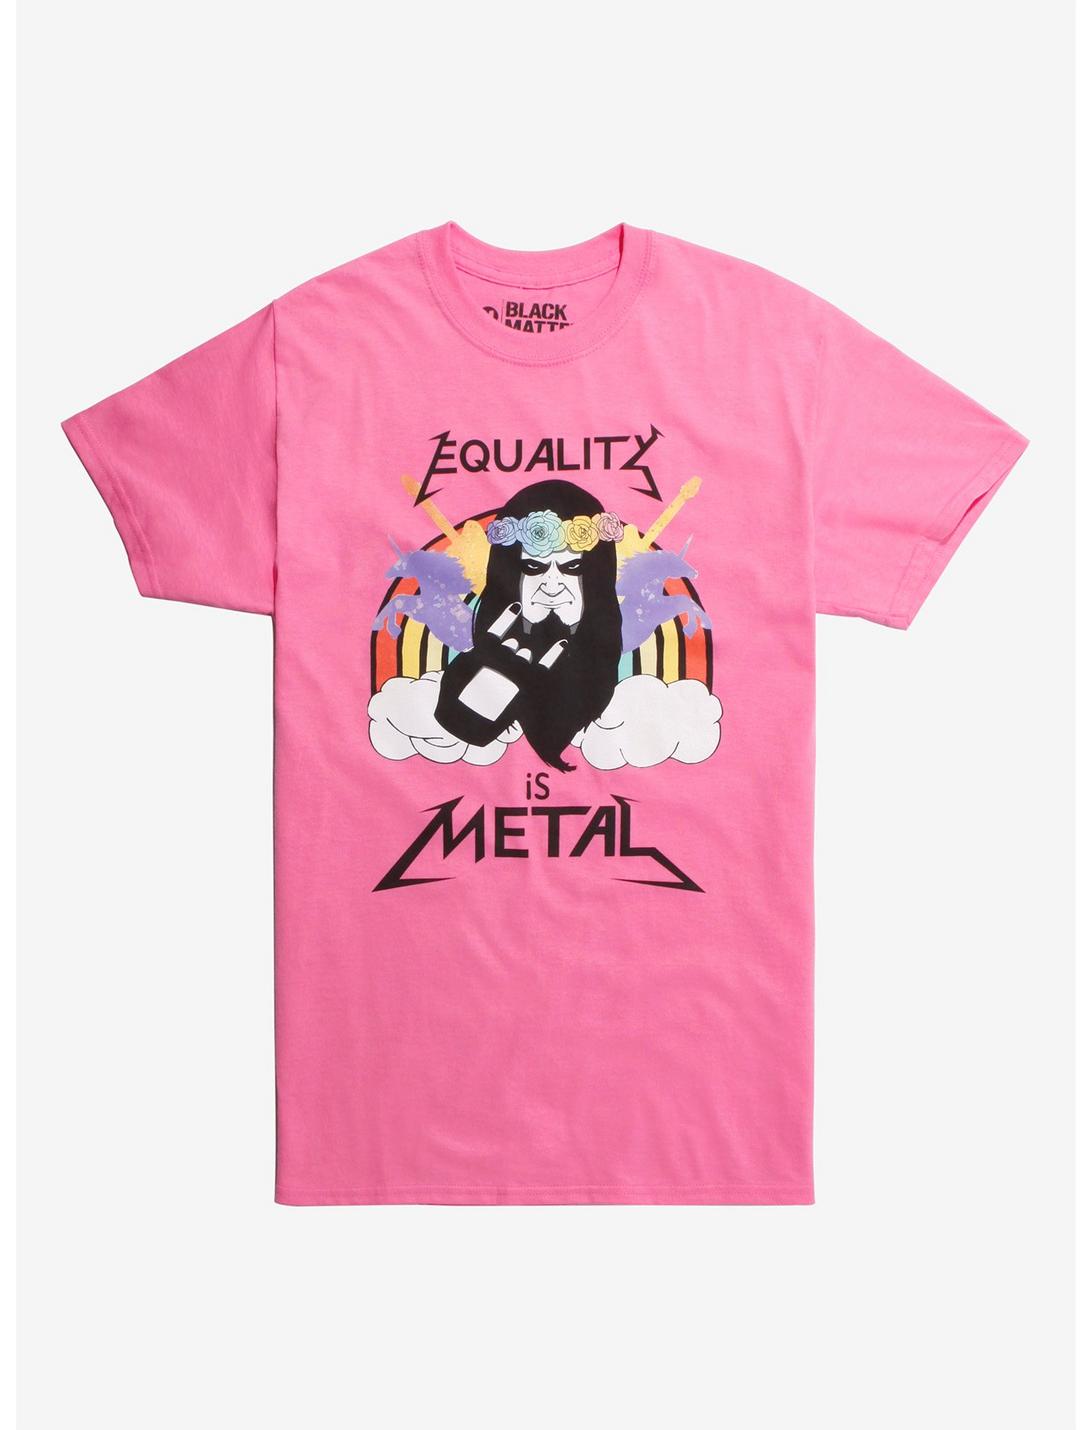 Equality Is Metal T-Shirt Hot Topic Exclusive, PINK, hi-res